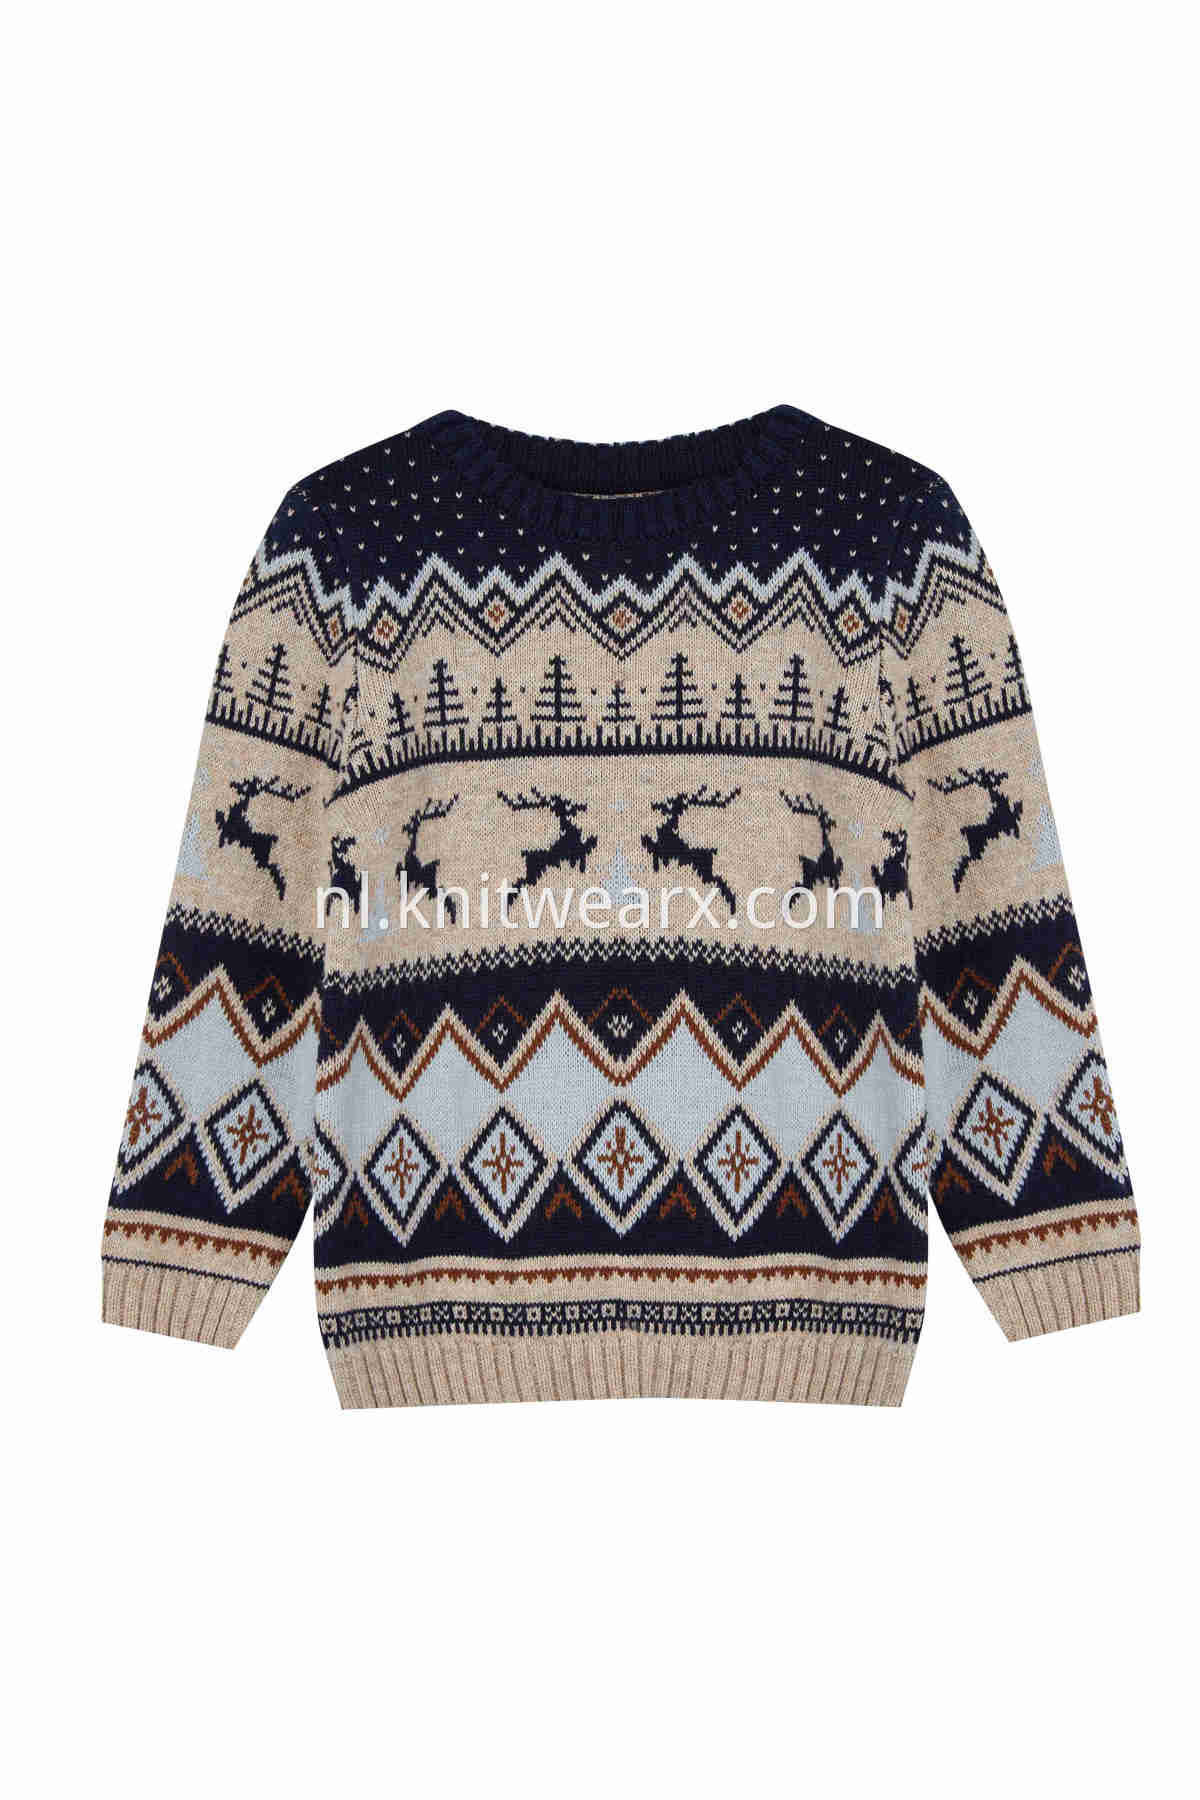 Boy Girl Ugly Christmas Cute Reindeer Knitted Sweater Pullover